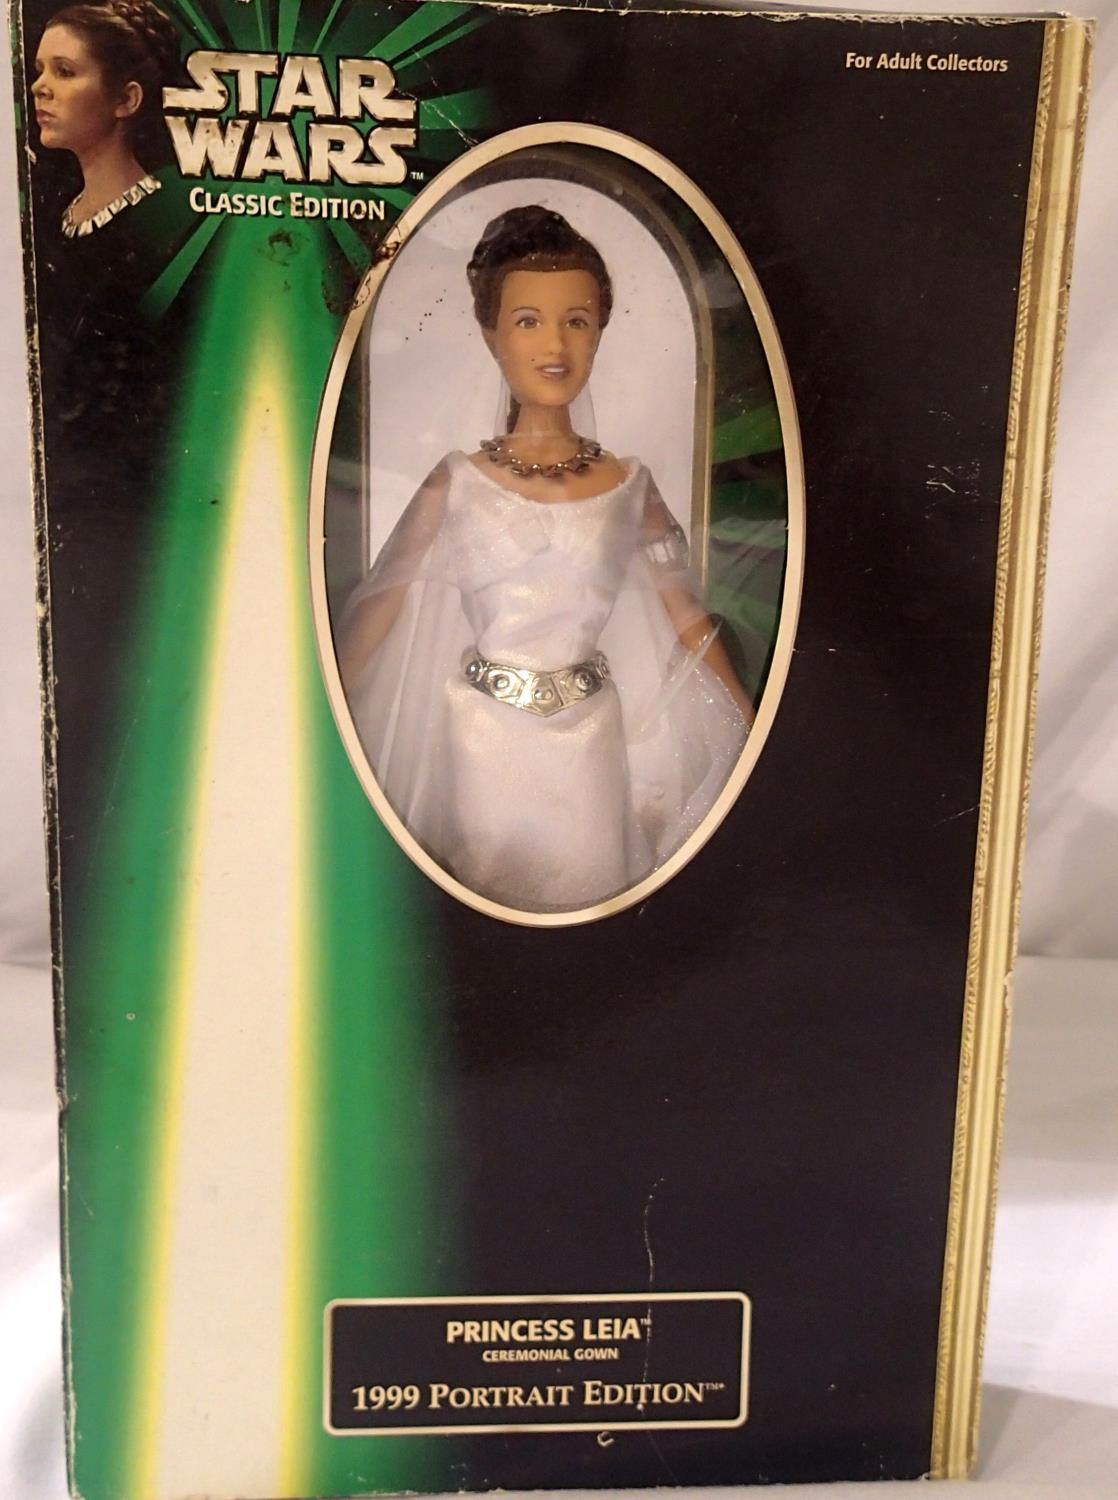 Boxed figure of princess Leia from the 1999 portrait edition. P&P Group 2 (£18+VAT for the first lot